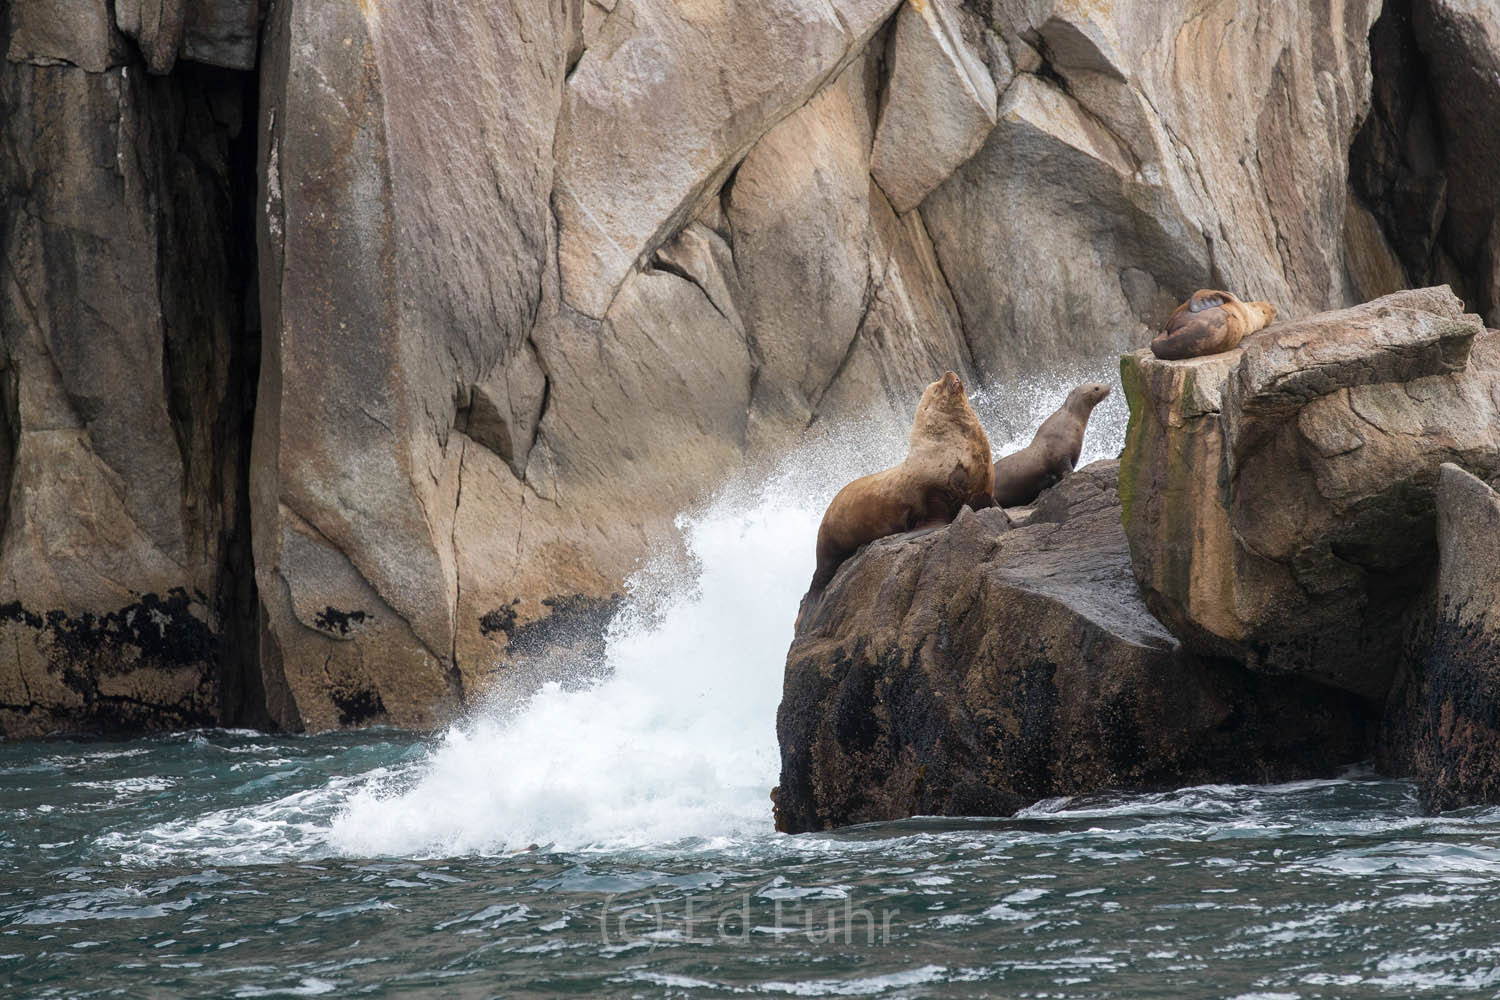 Steller Sea Lions rest on a favorite haul out near Resurrection Bay.  Males weigh some 1500 pounds and feast on the plentiful...